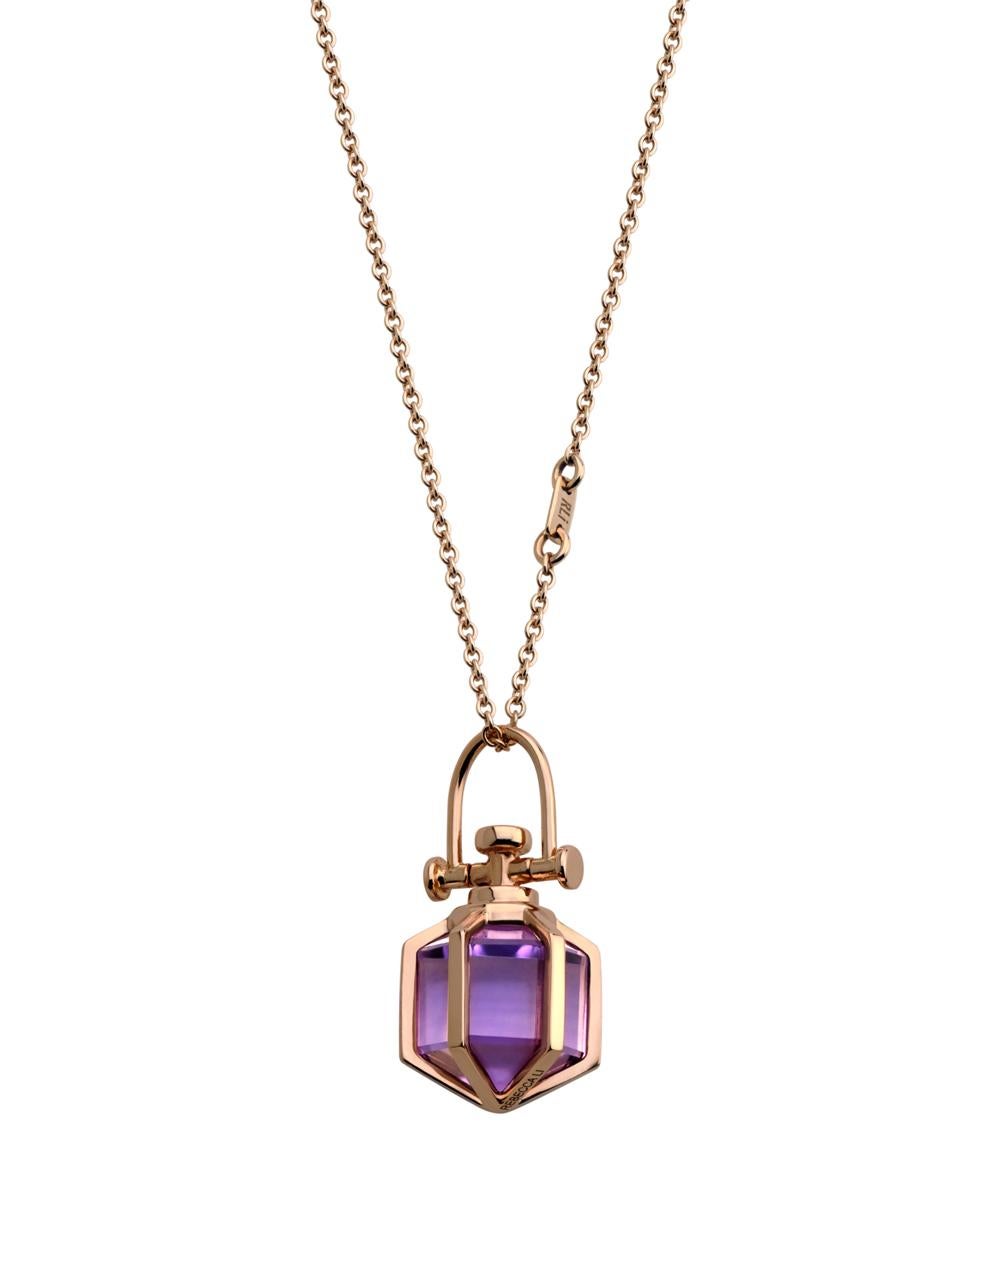 Rebecca Li designs mindfulness.
This sacred hexagon inspired necklace  signifies our intuition.
Amethyst means Intuition, Creativity & Awakening.

Talisman Pendant :
18K Rose Gold
Natural Amethyst
Pendant Size: 9 mm W * 9 mm D * 18 mm H
Gemstone